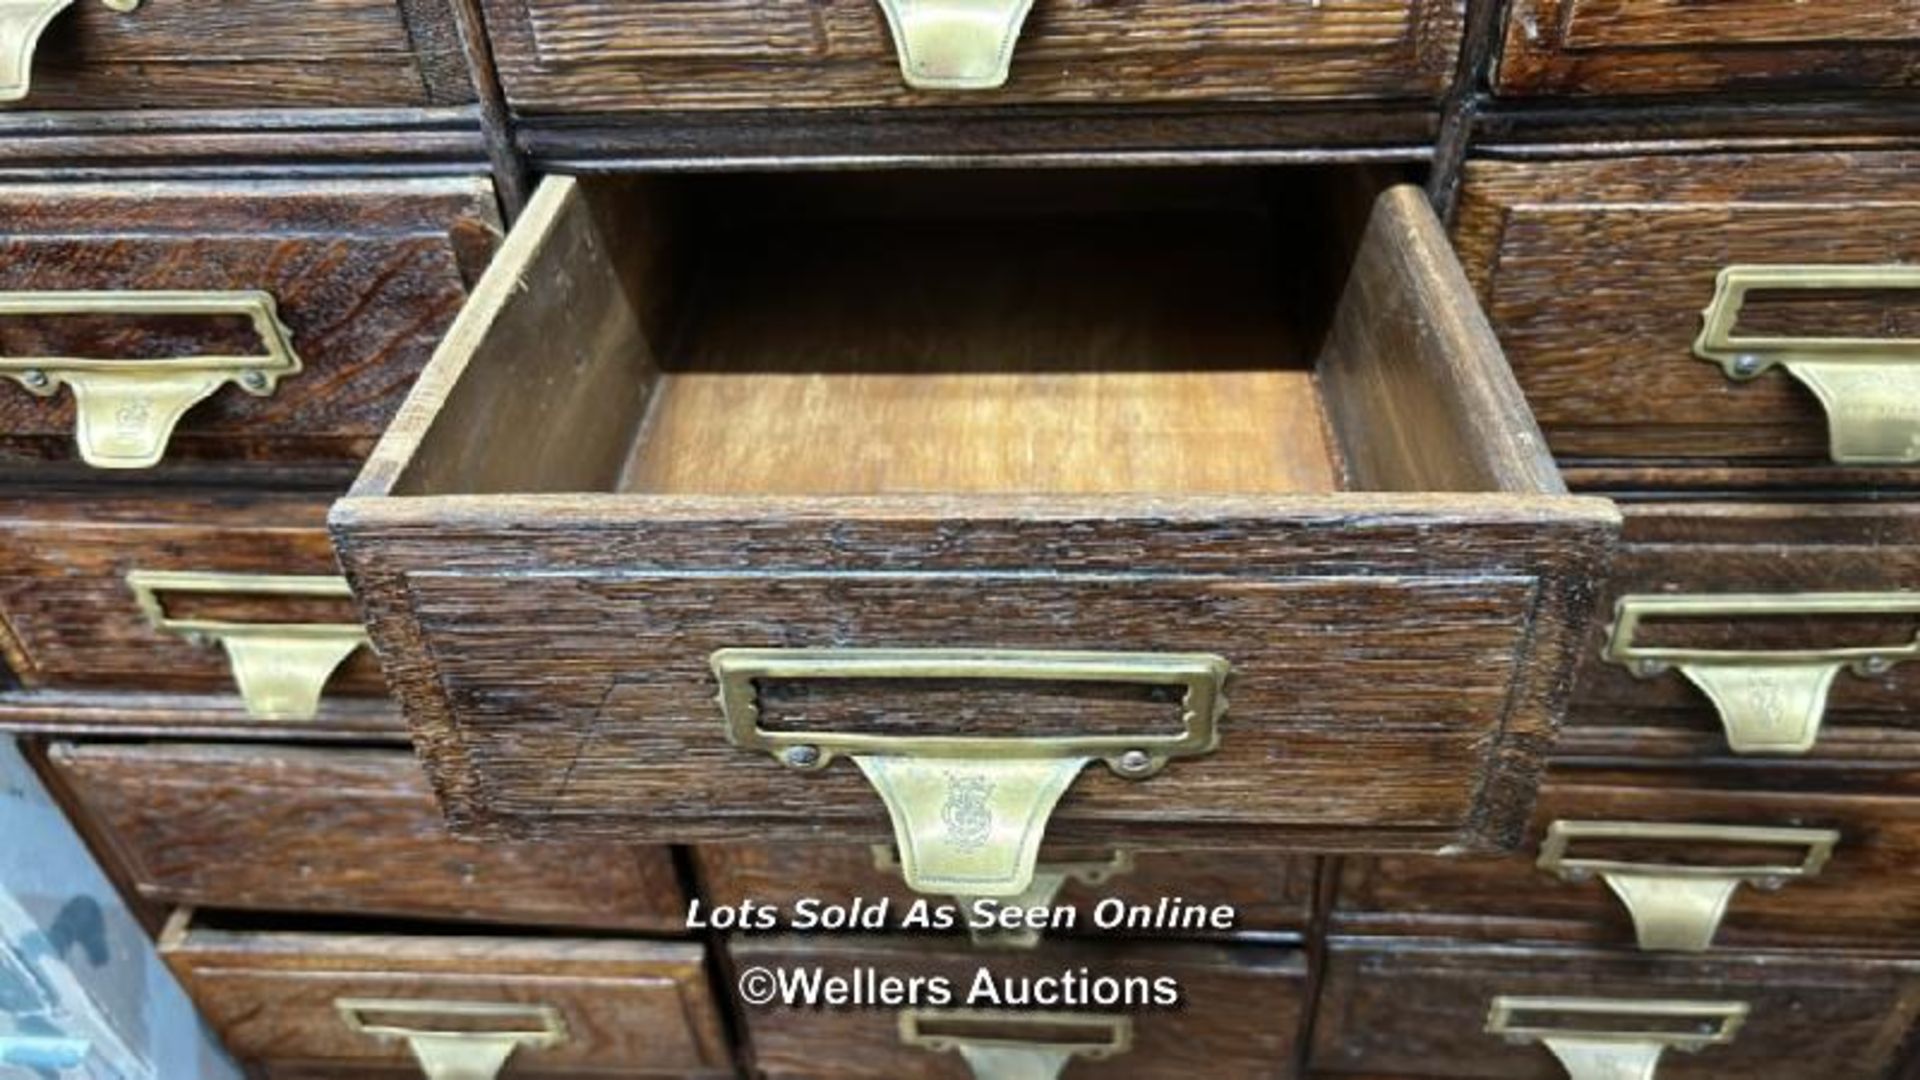 LATE 19TH CENTURY FILING CABINET, 27 DRAWERS, SHOWS WITH MISSING HANDLE, THE HANDLE IS PRESENT - Image 6 of 6